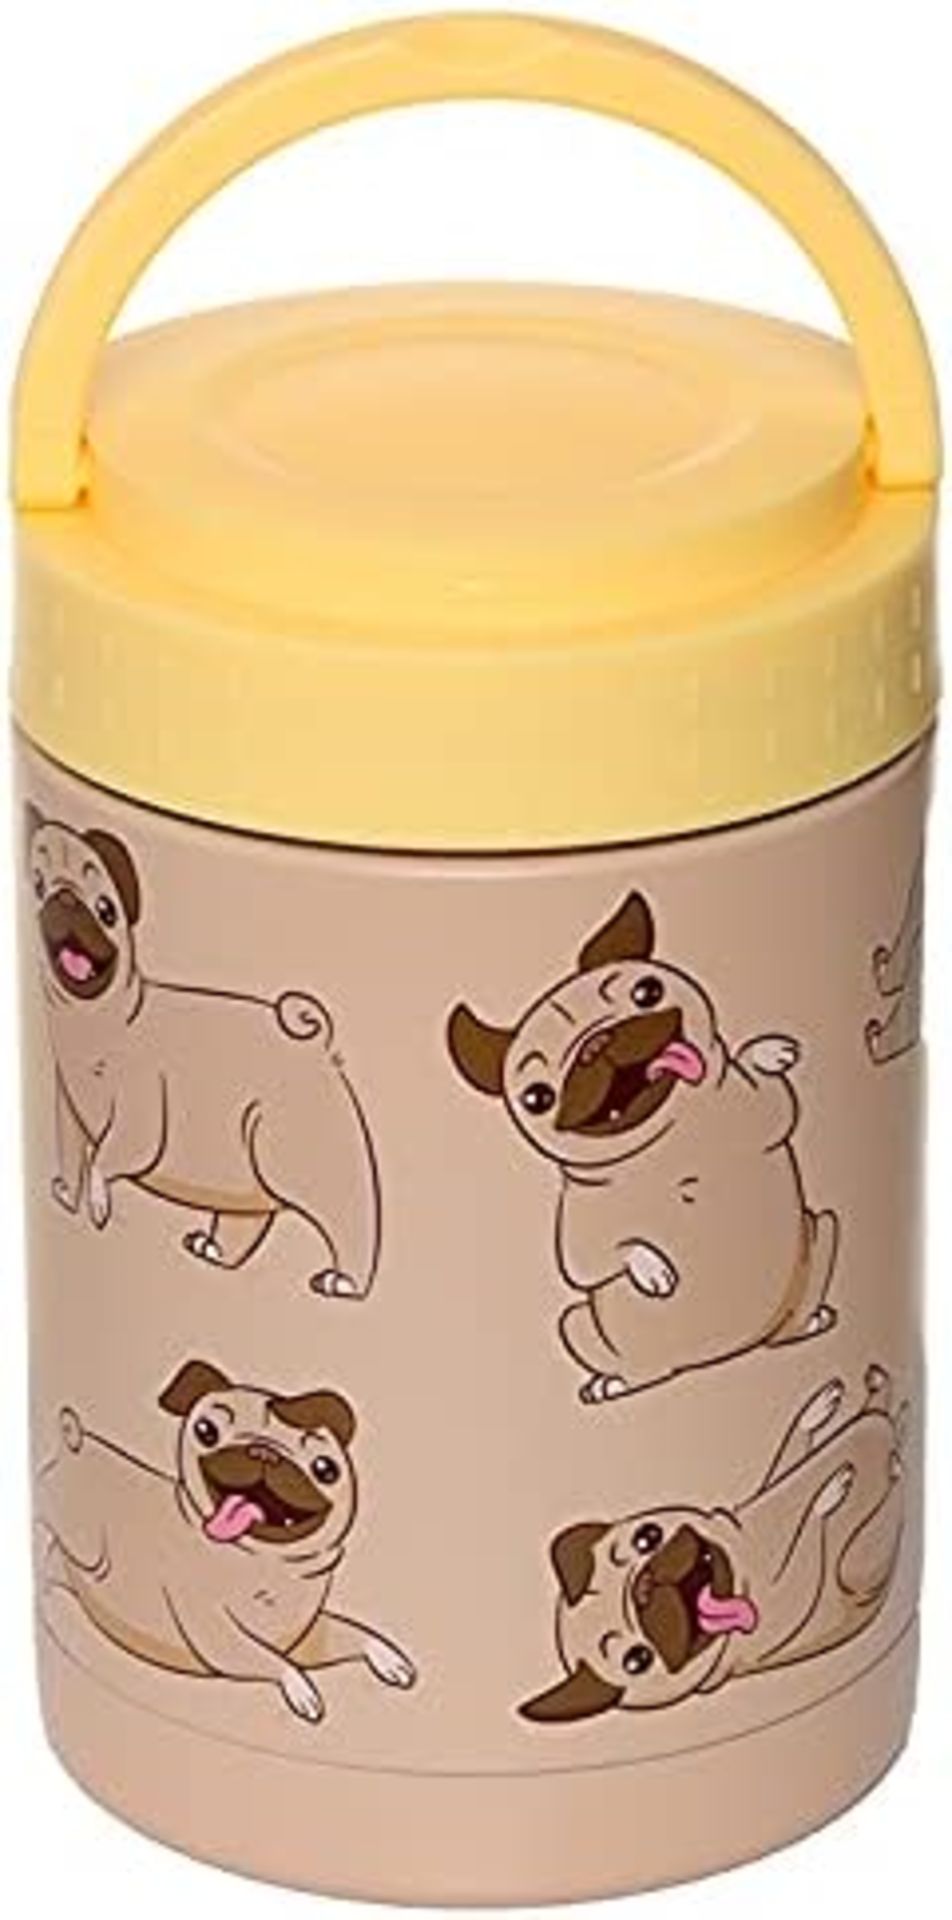 16 X NEW PUG HOT & COLD LUNCH POT 500ML